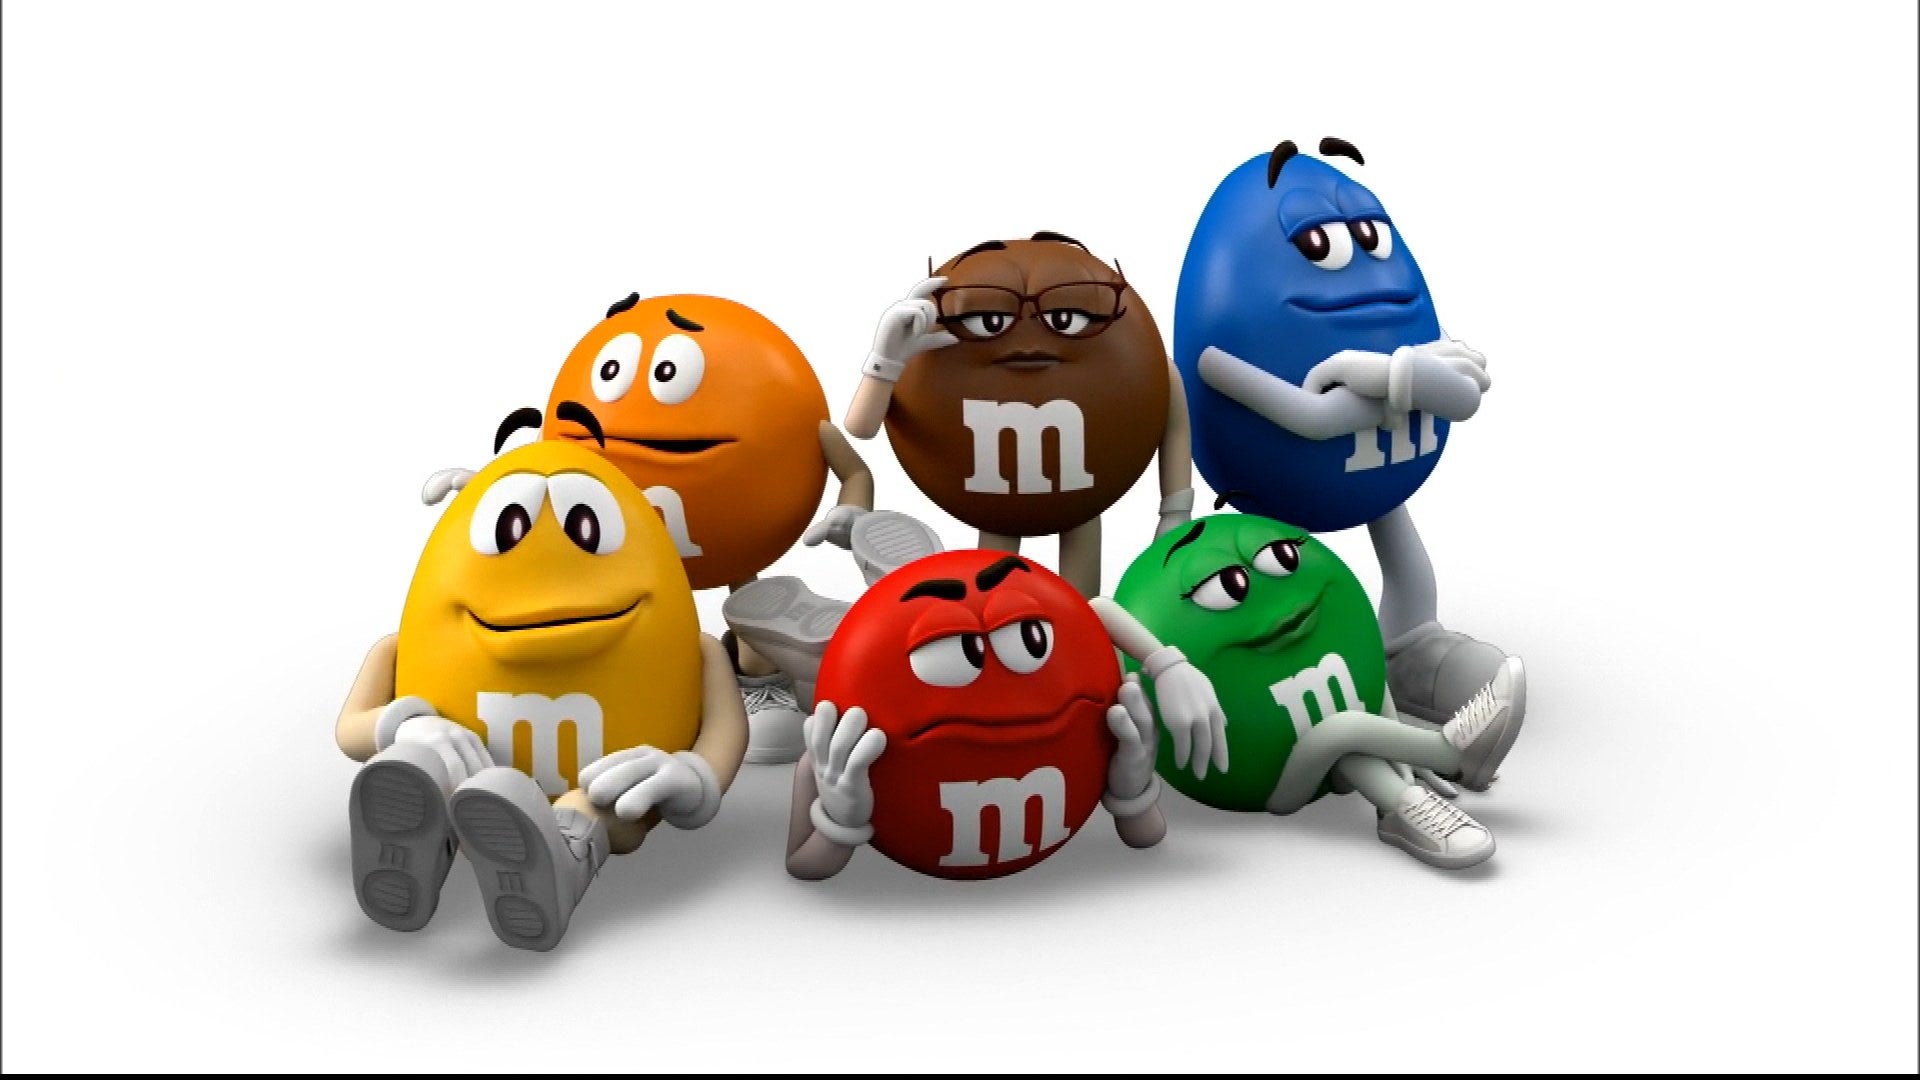 The M&M spokescandies are back after 'controversy' 